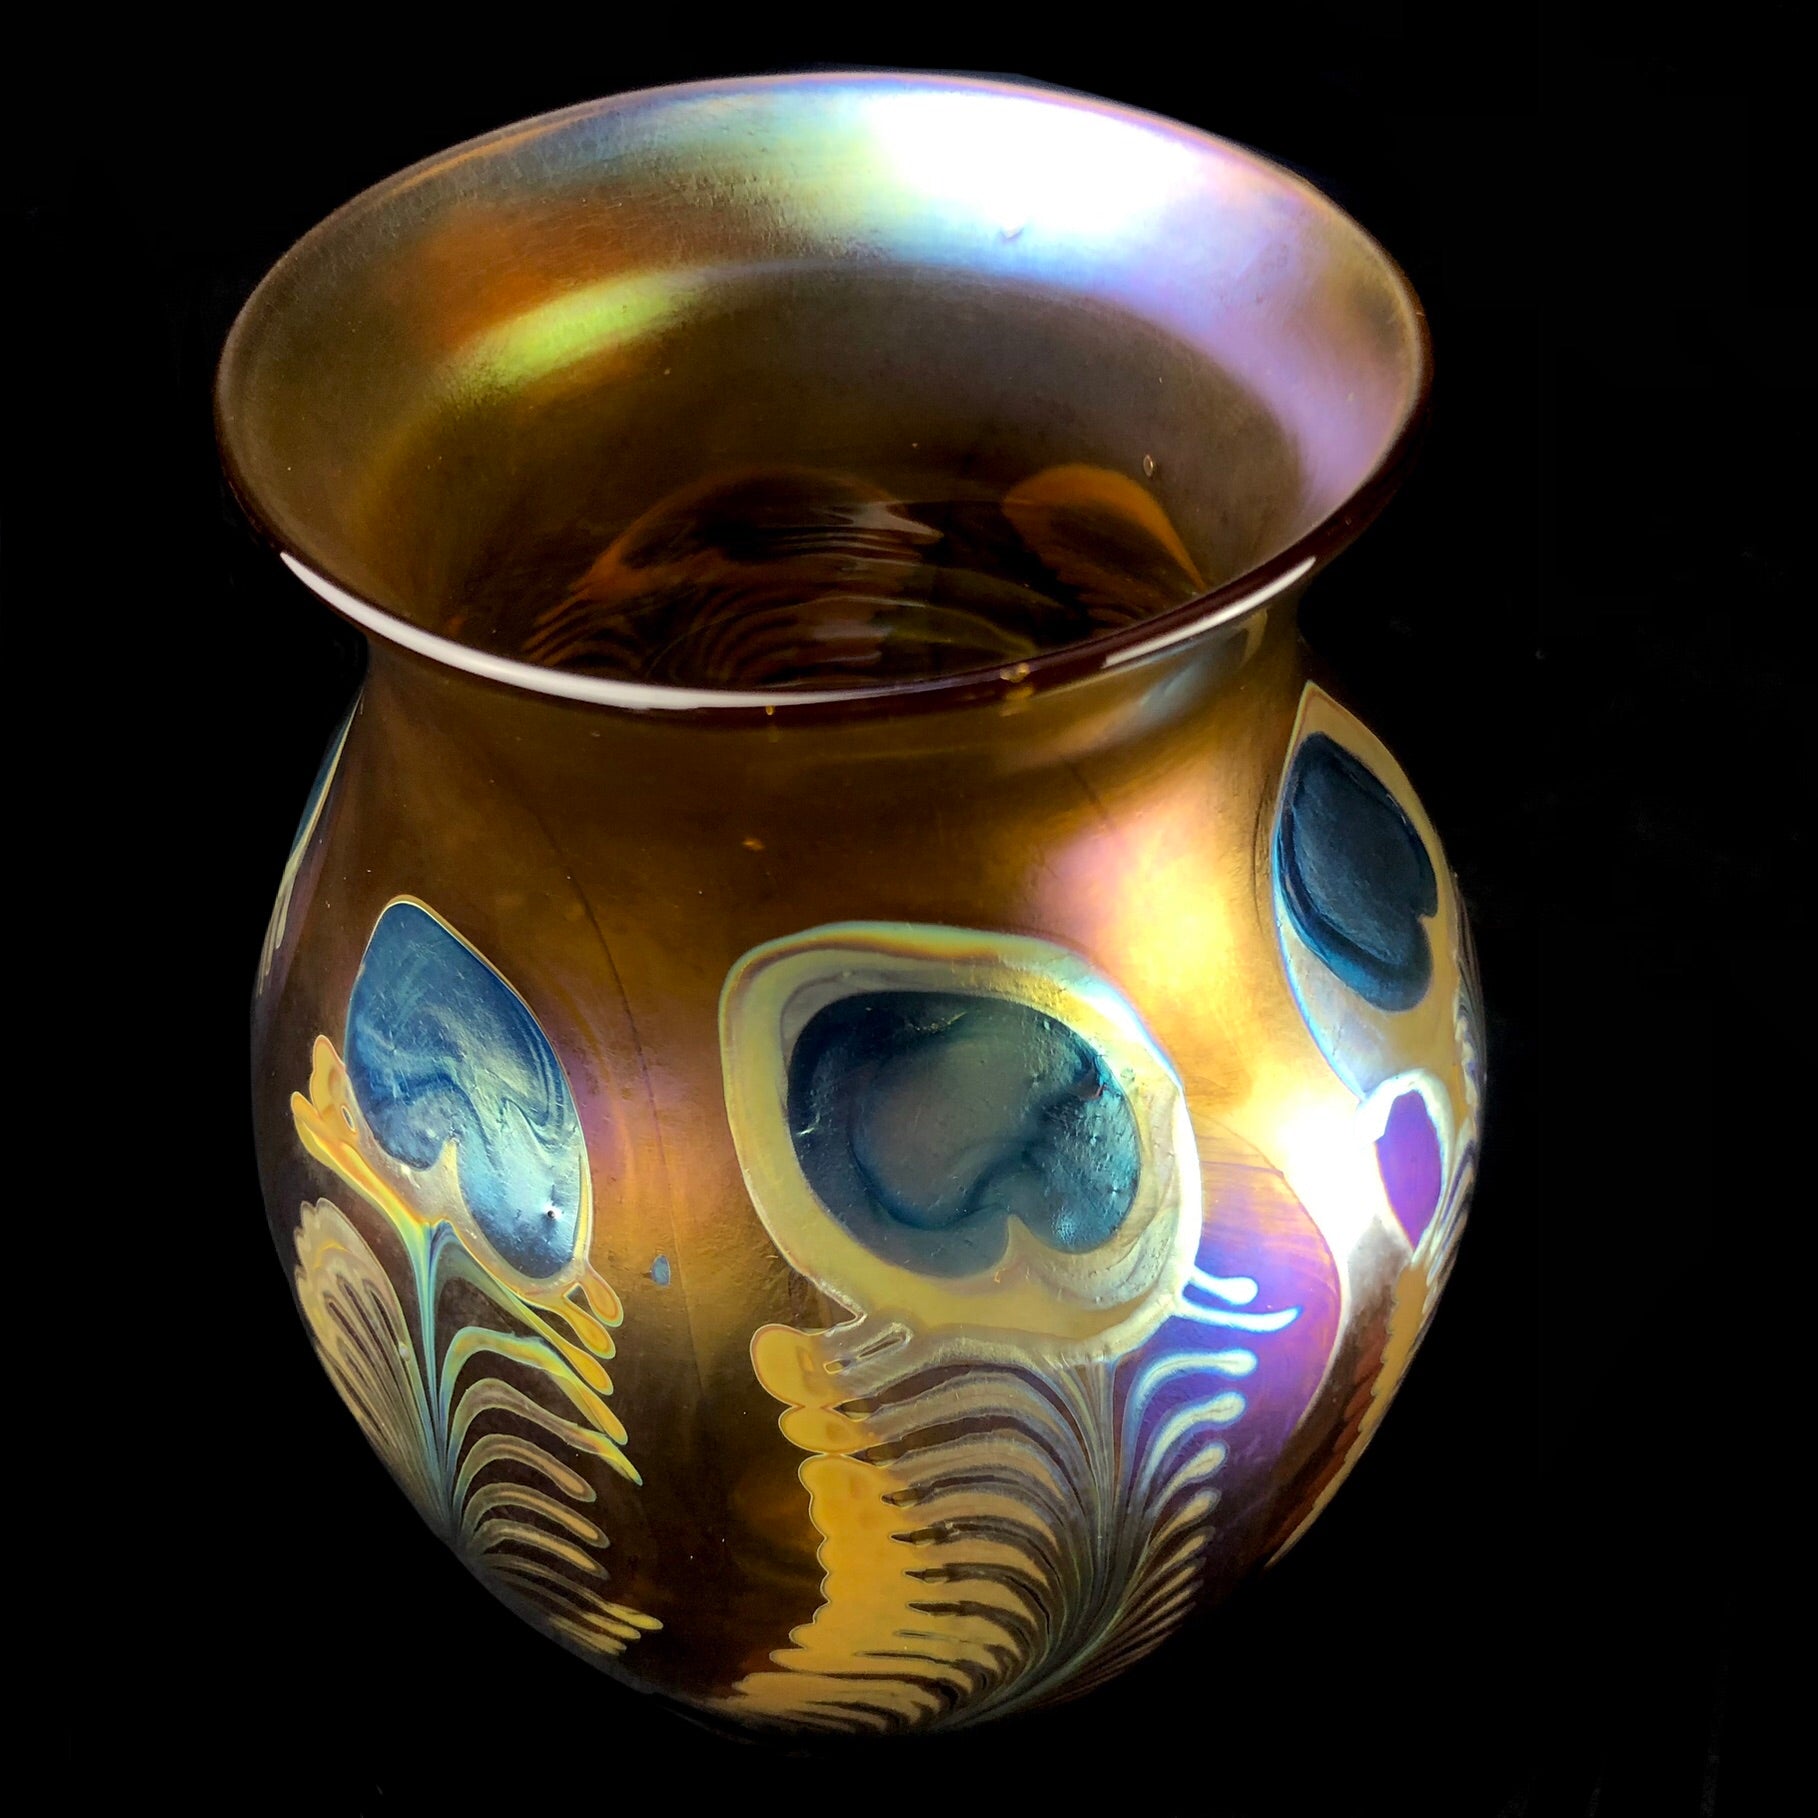 Top view of Large Amber Peacock Vase